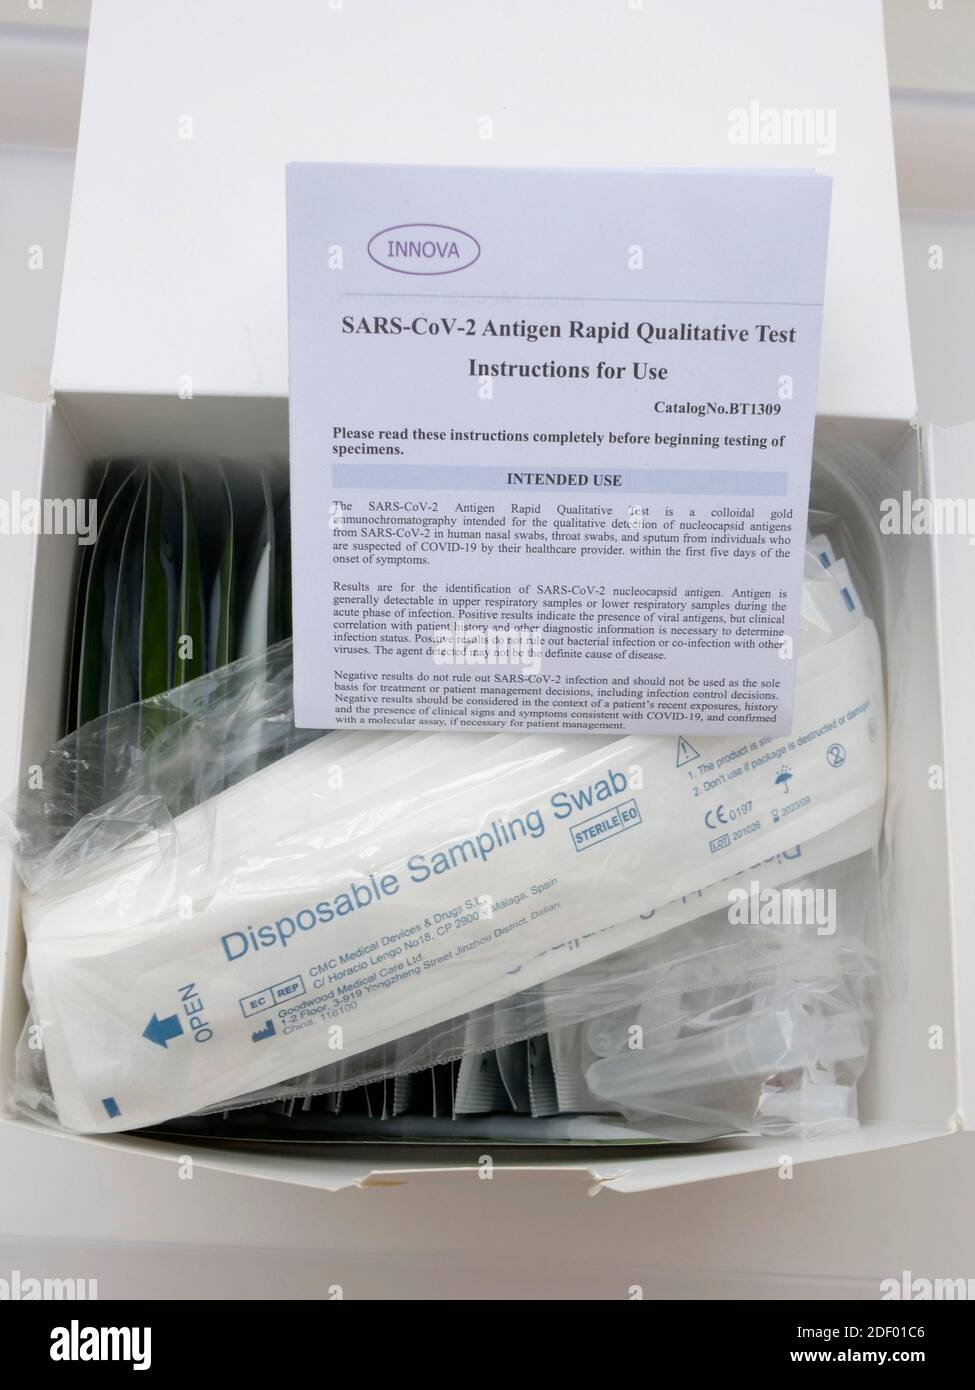 Innova brand Sars Cov 2 Antigen Rapid Qualitative Test Instant Covid 19 Coronavirus testing kit giving a result in 30 minutes issued to NHS staff to self test before going to work. Stock Photo